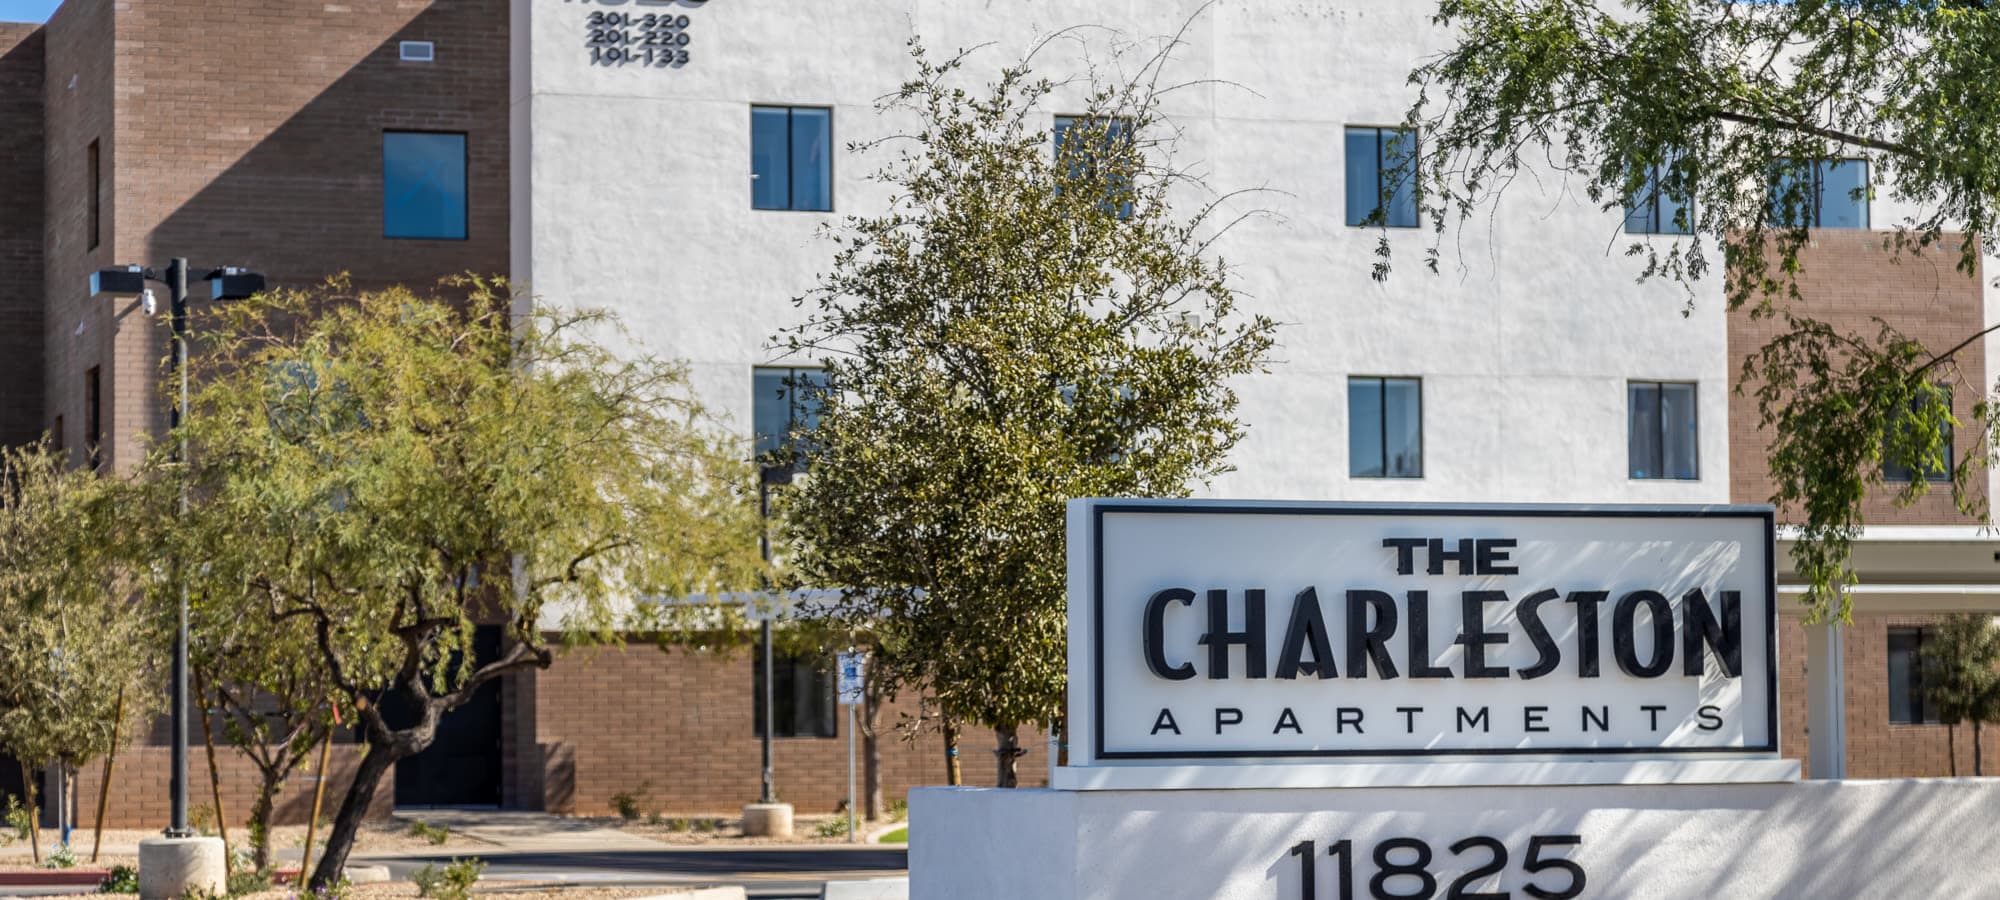 Entrance sign in front of the building at The Charleston Apartments in Phoenix, Arizona